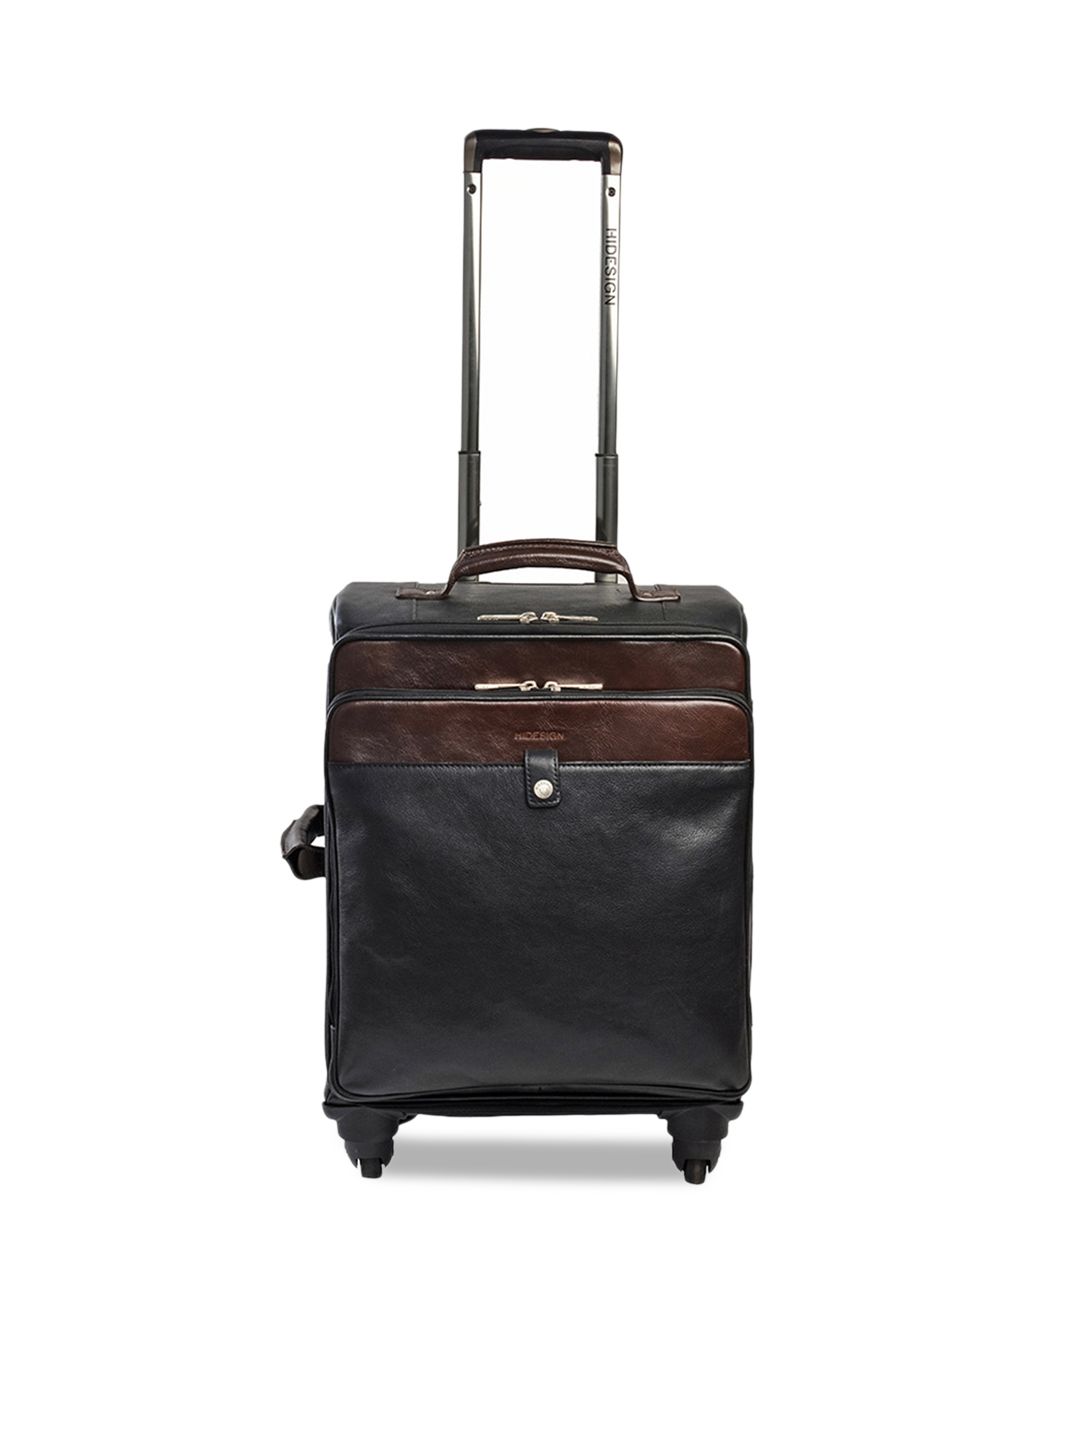 Hidesign Black Solid Sundown 01 Melbourne Khyber Medium Leather Trolley Suitcase Price in India